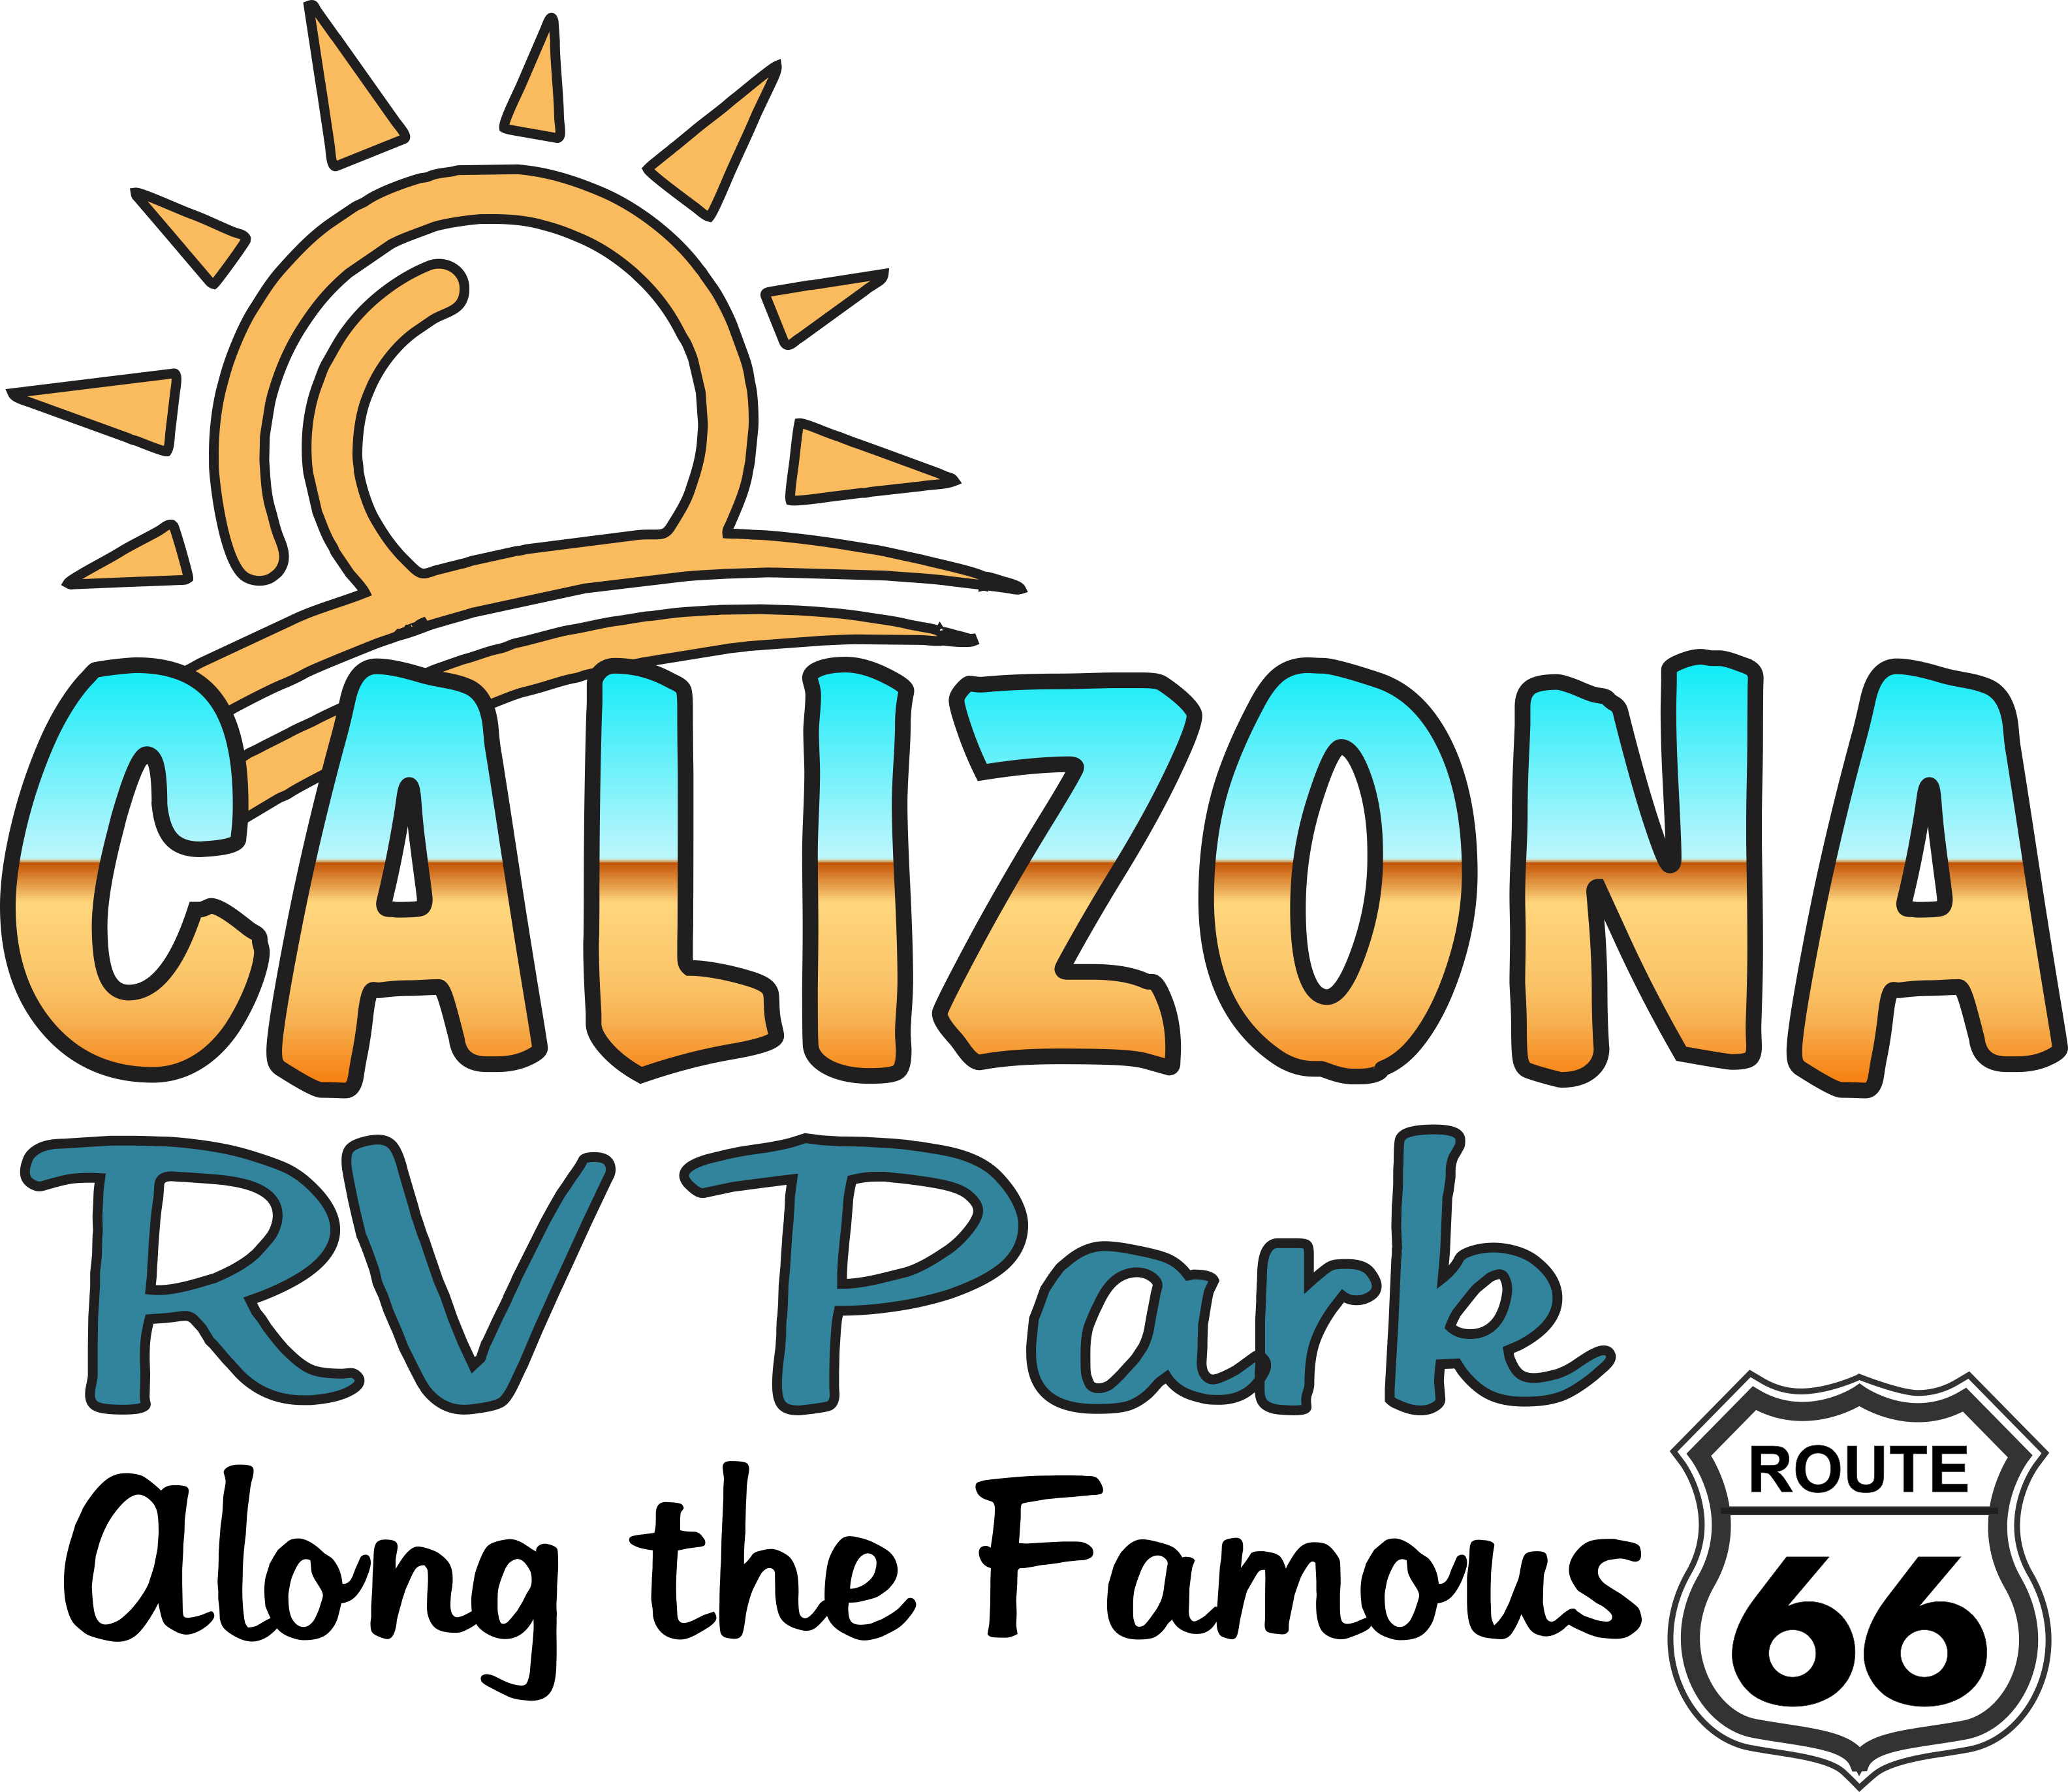 Calizona RV Park and Route 66